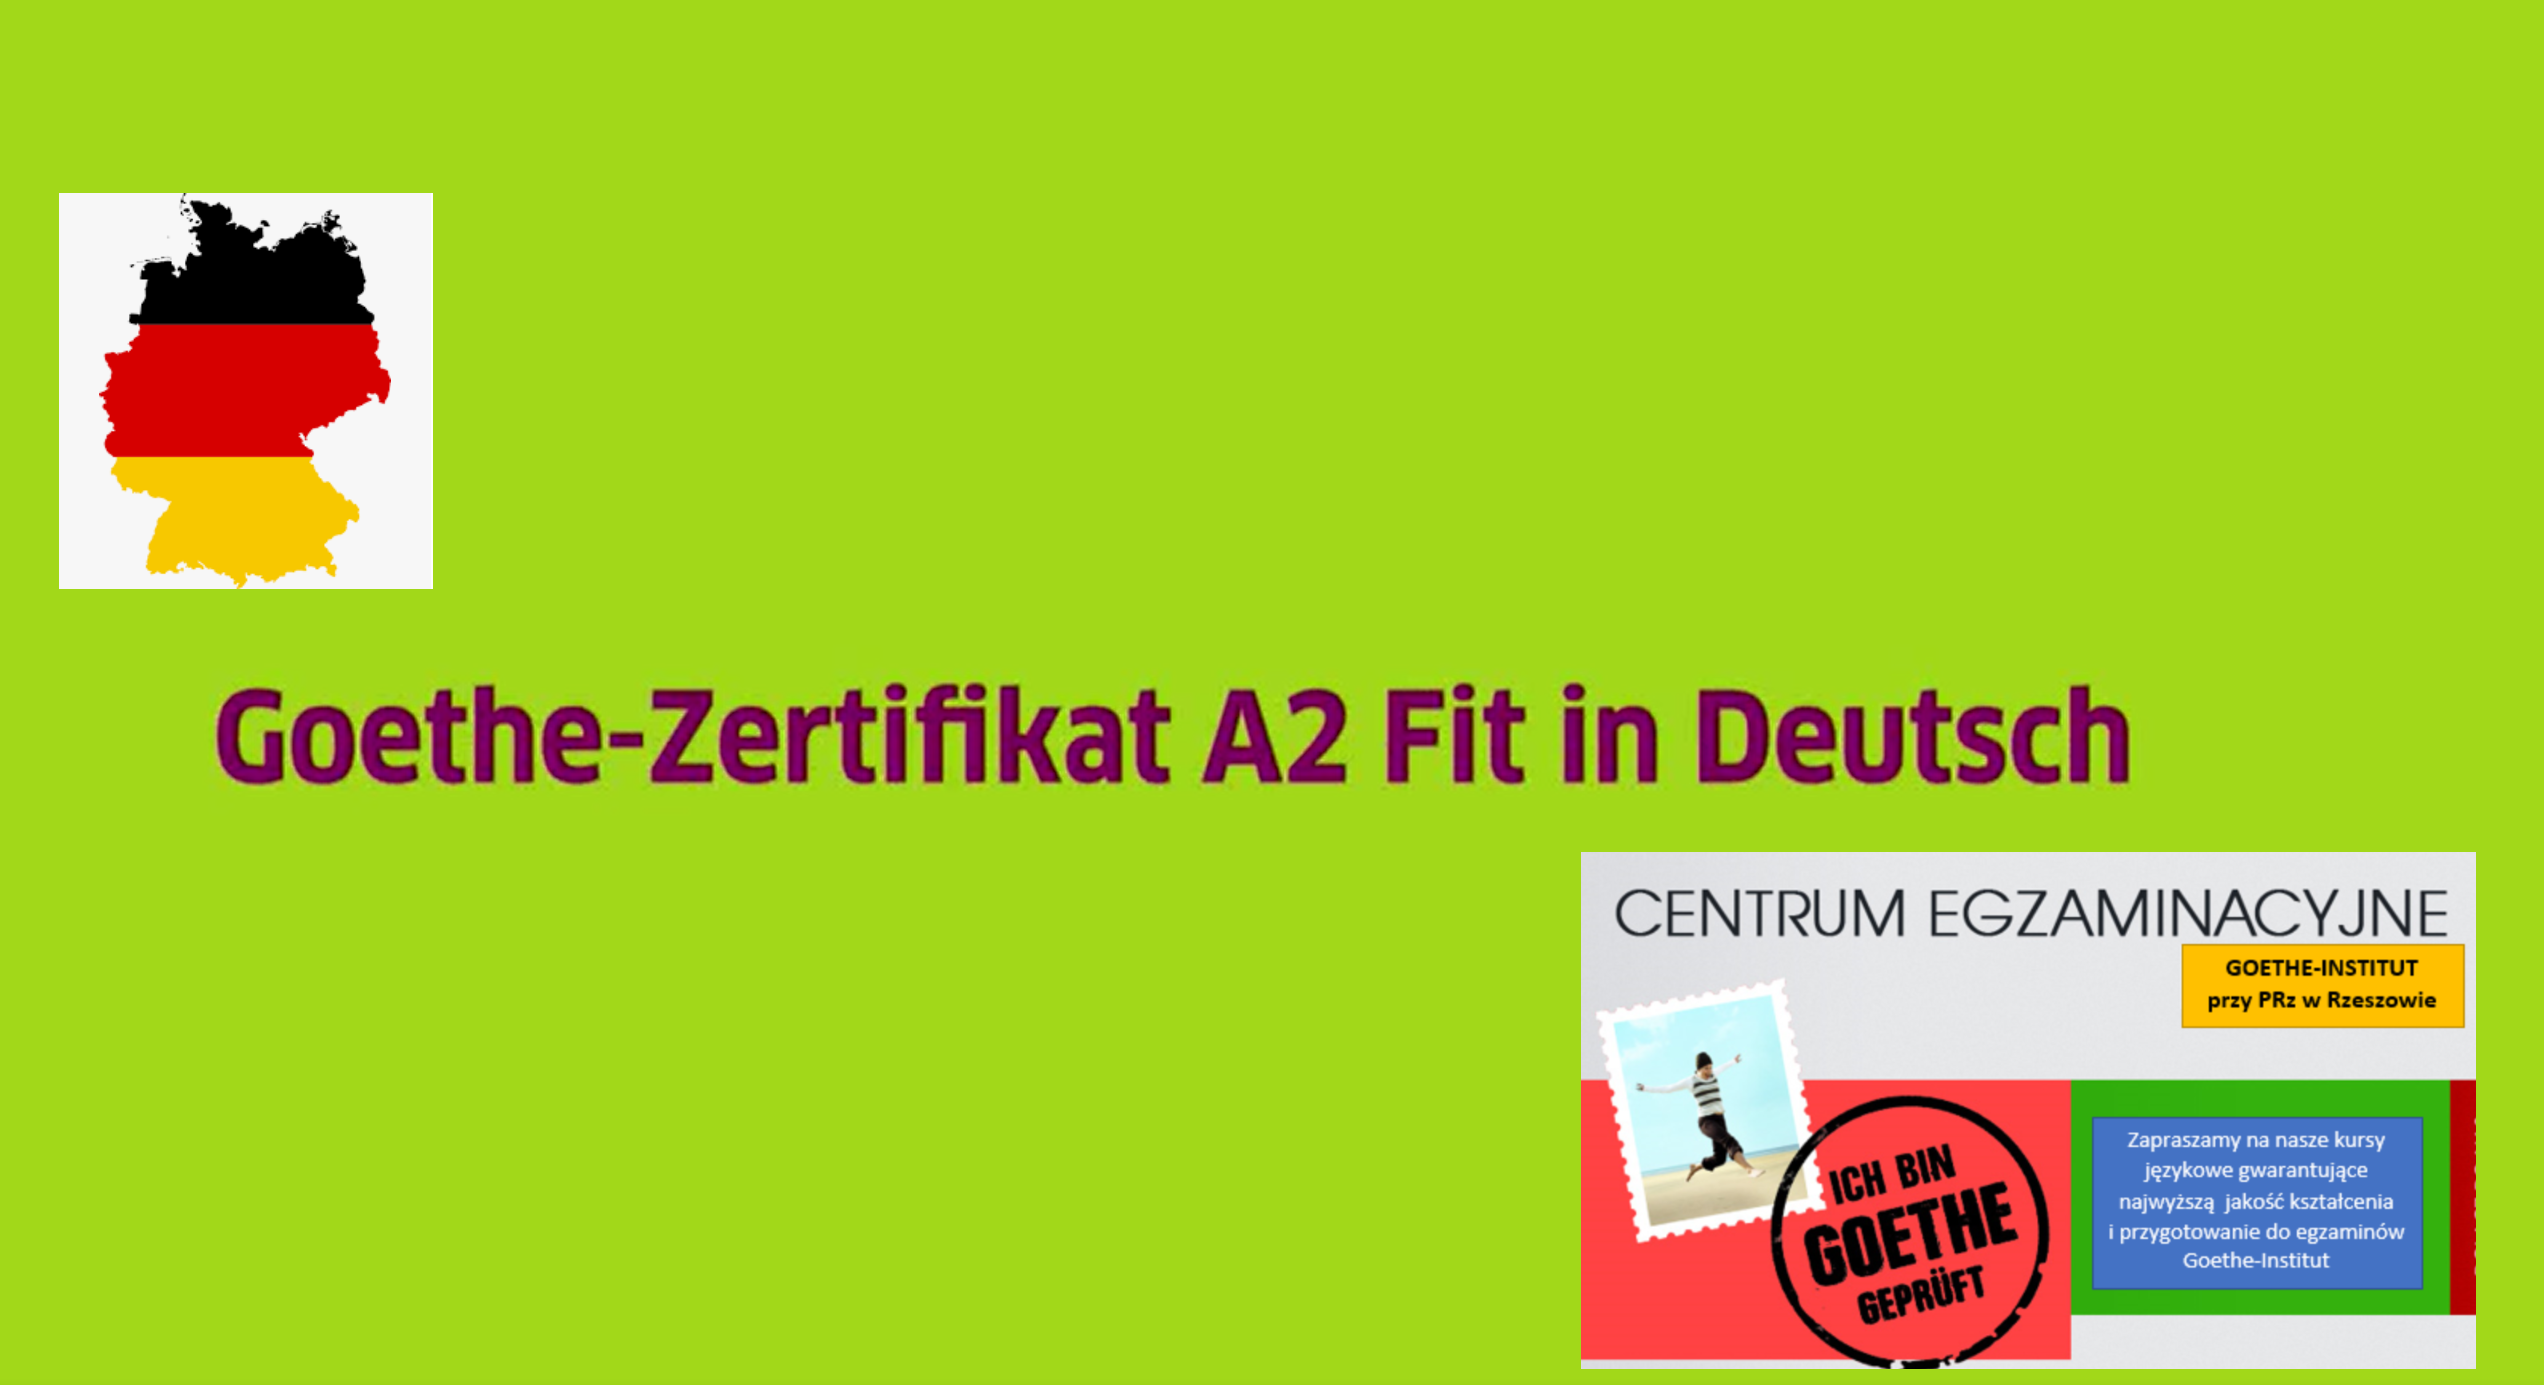 A2 fit 2